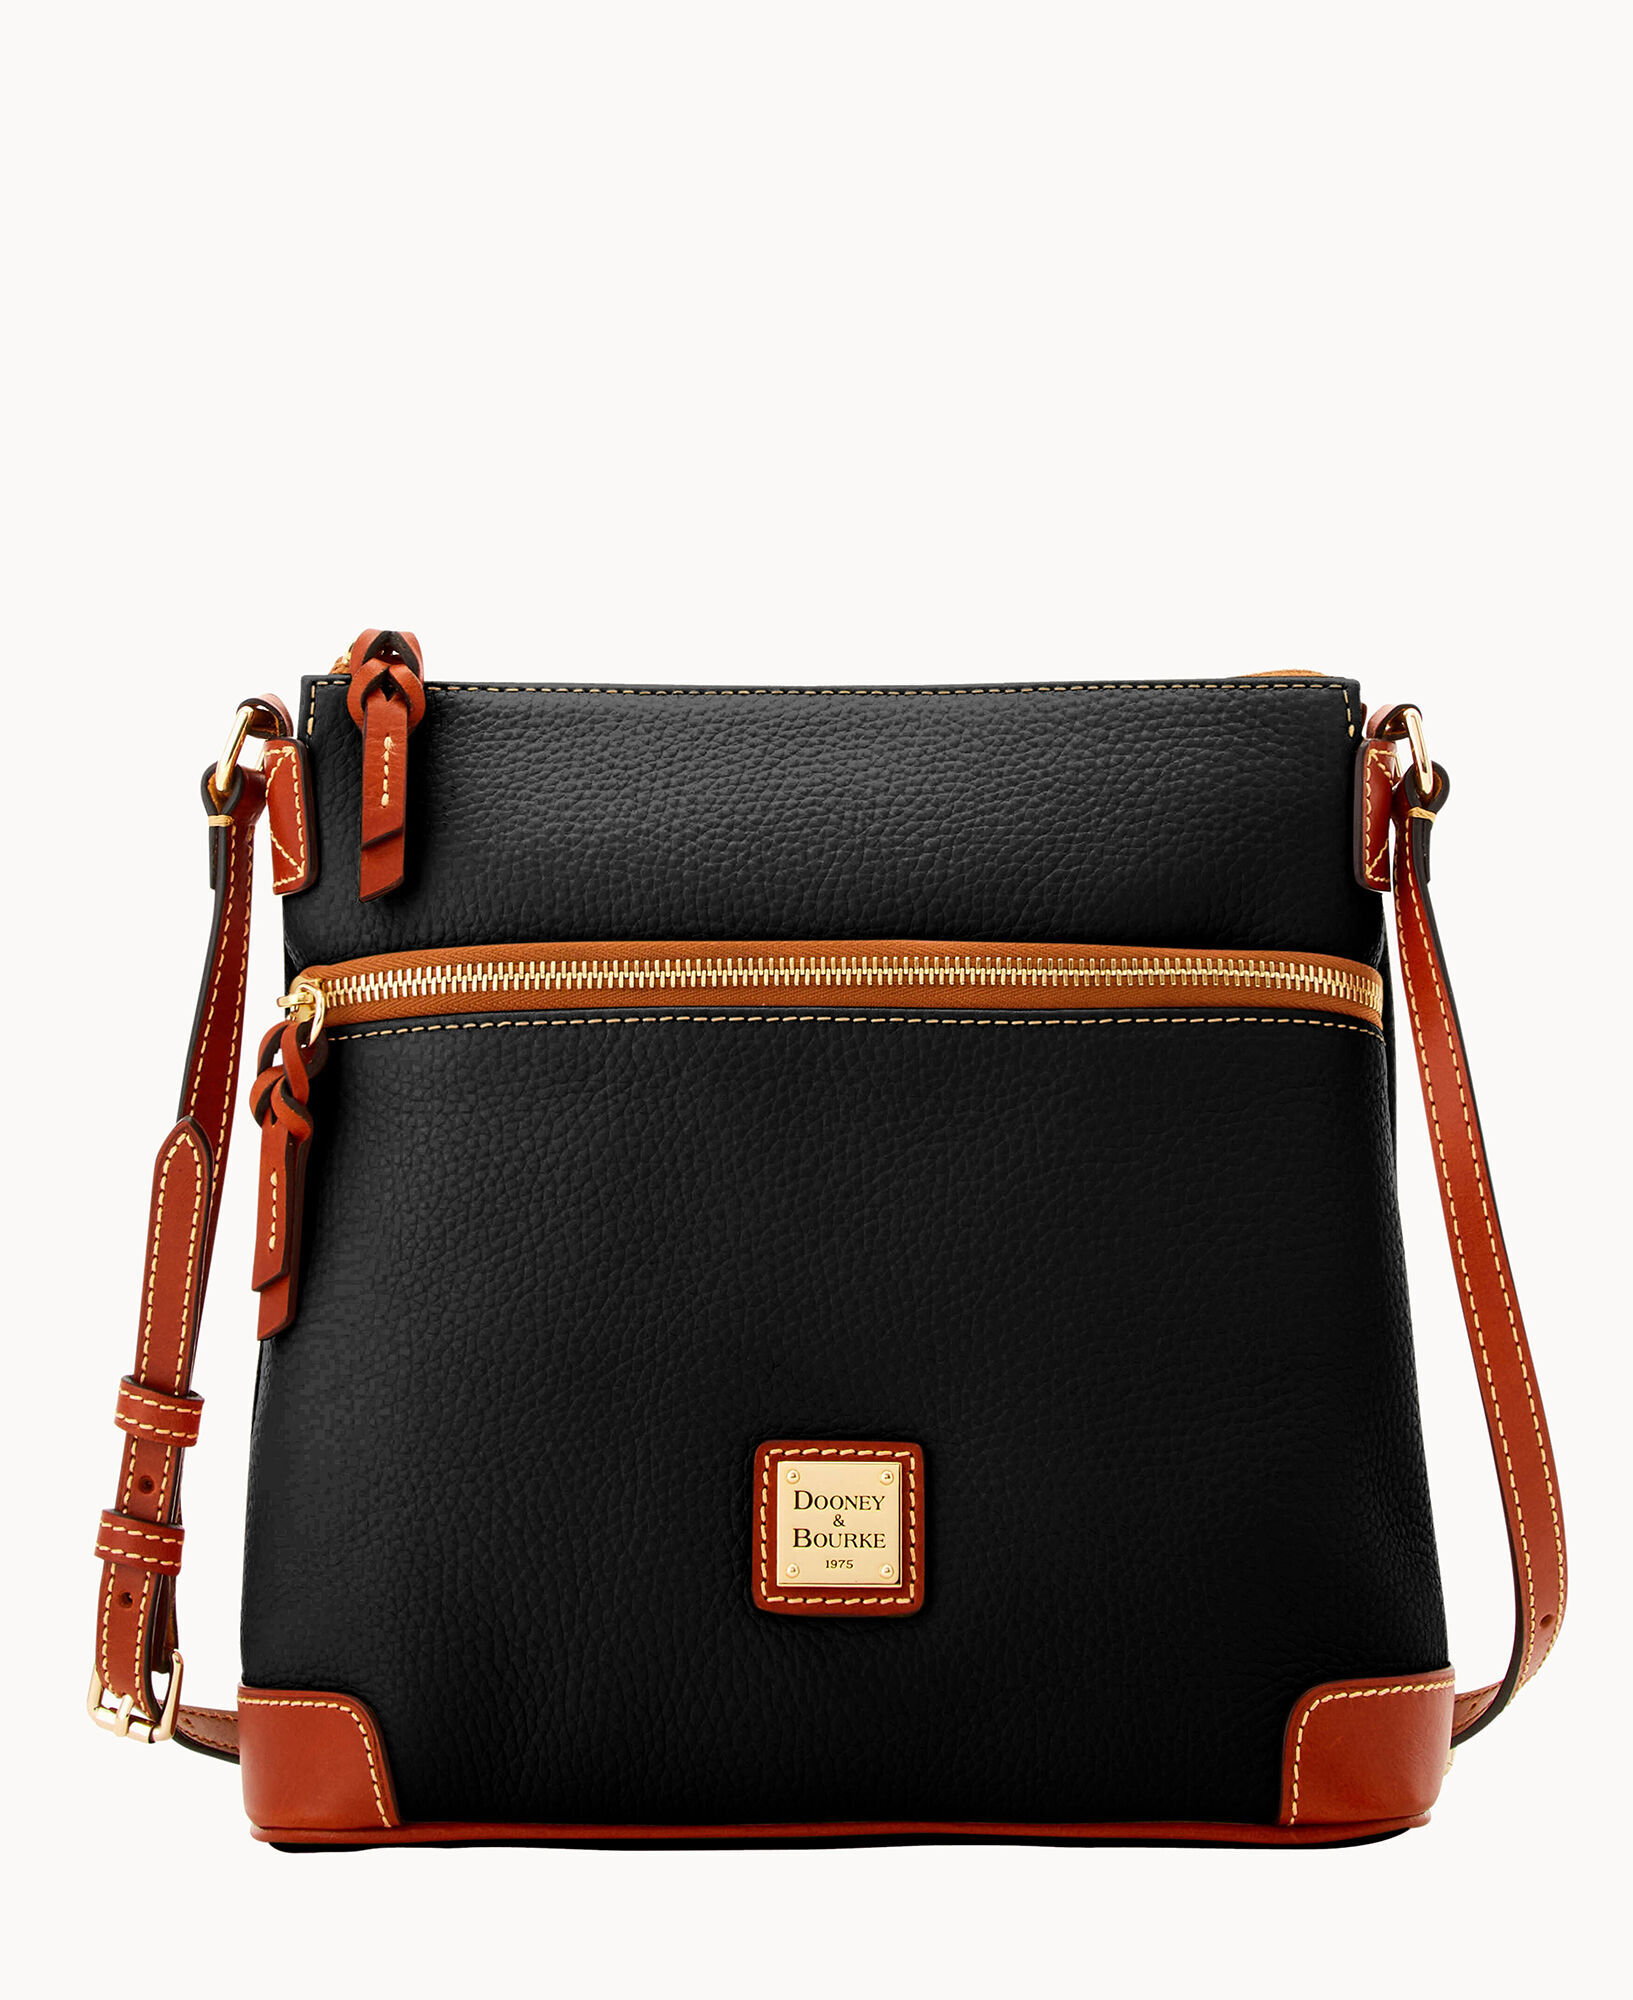 Hand Woven Leather Crossbody Bag Leather Bag Now You Can Add a